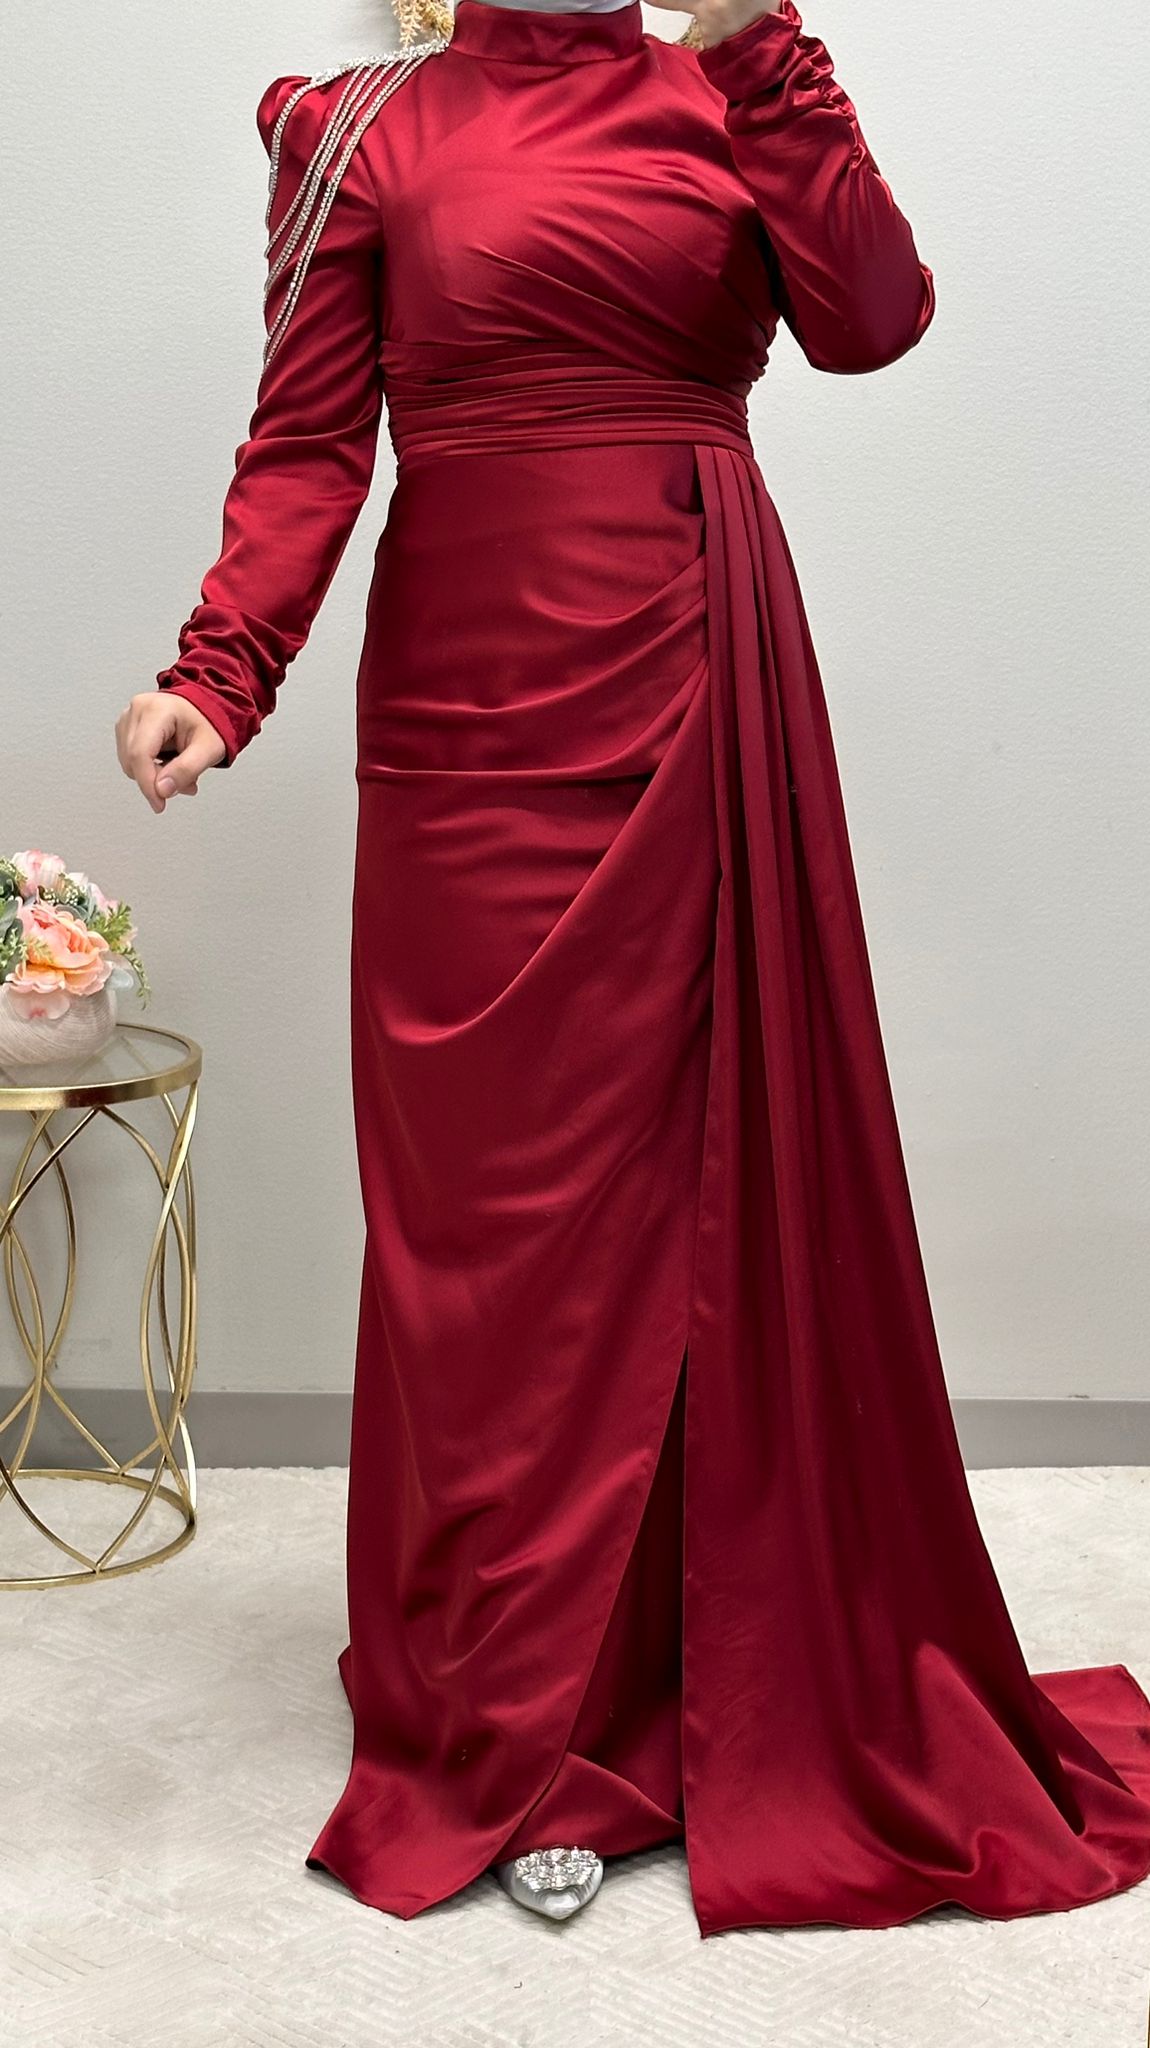 Regal Red Formal Dress: Chains and Overlapping Folds